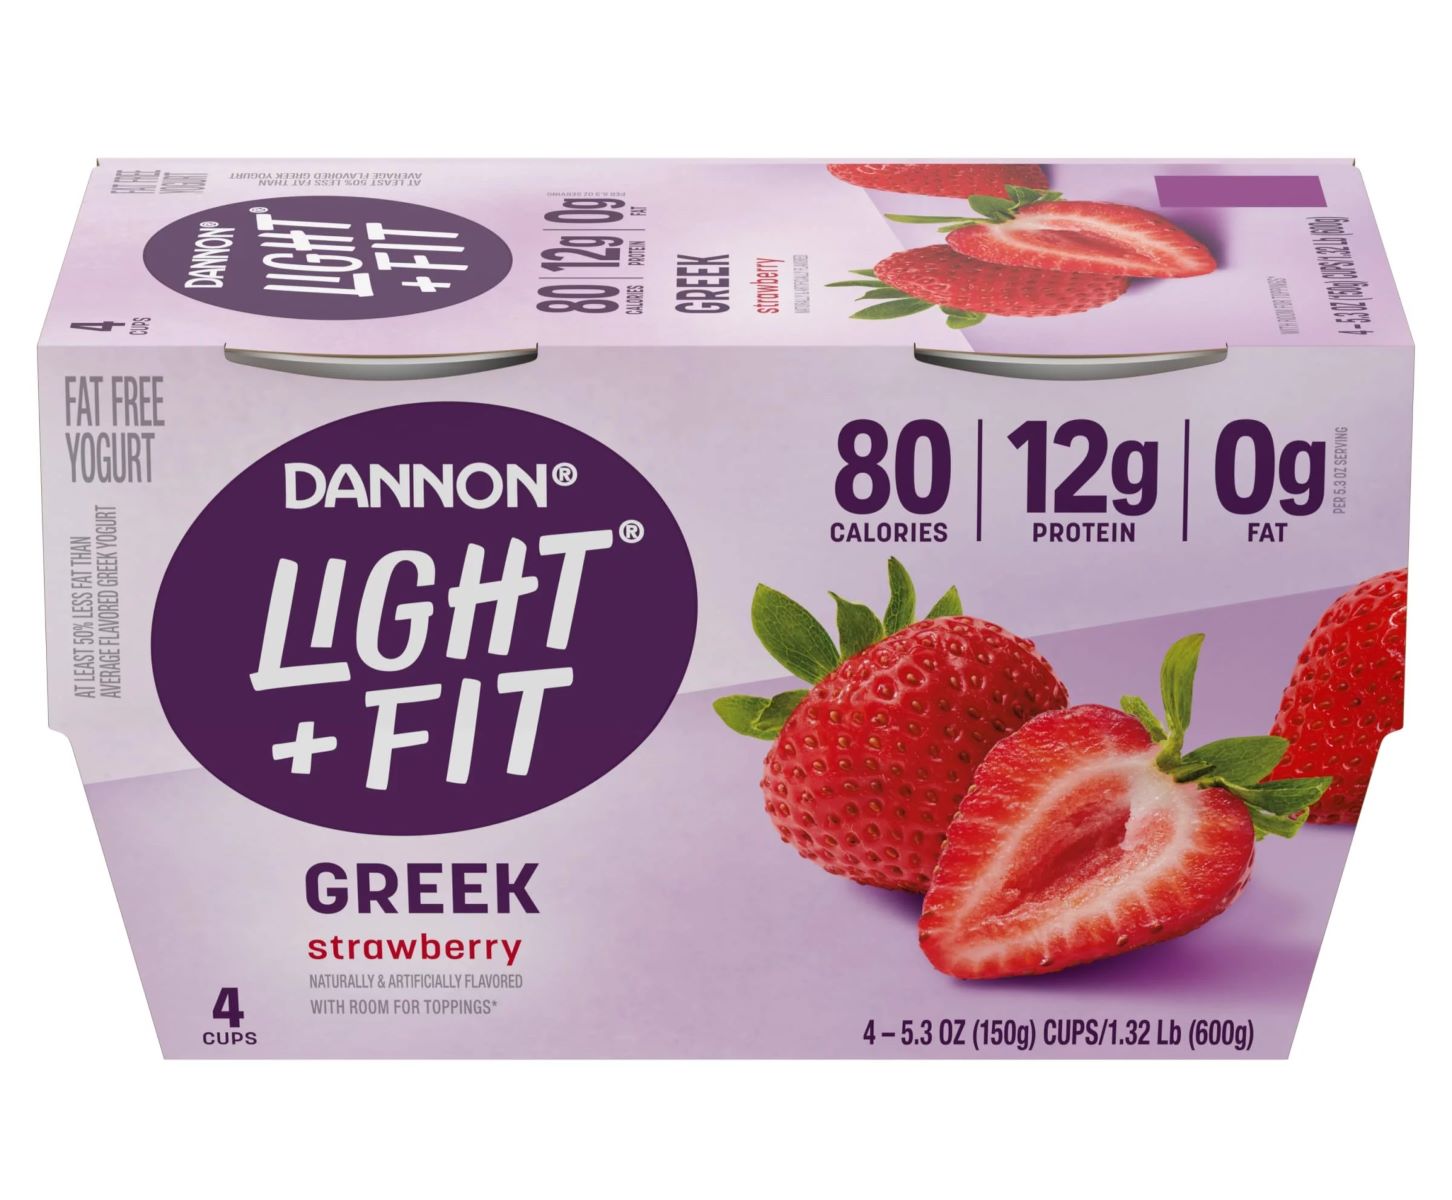 10-dannon-light-and-fit-greek-strawberry-yogurt-nutrition-facts